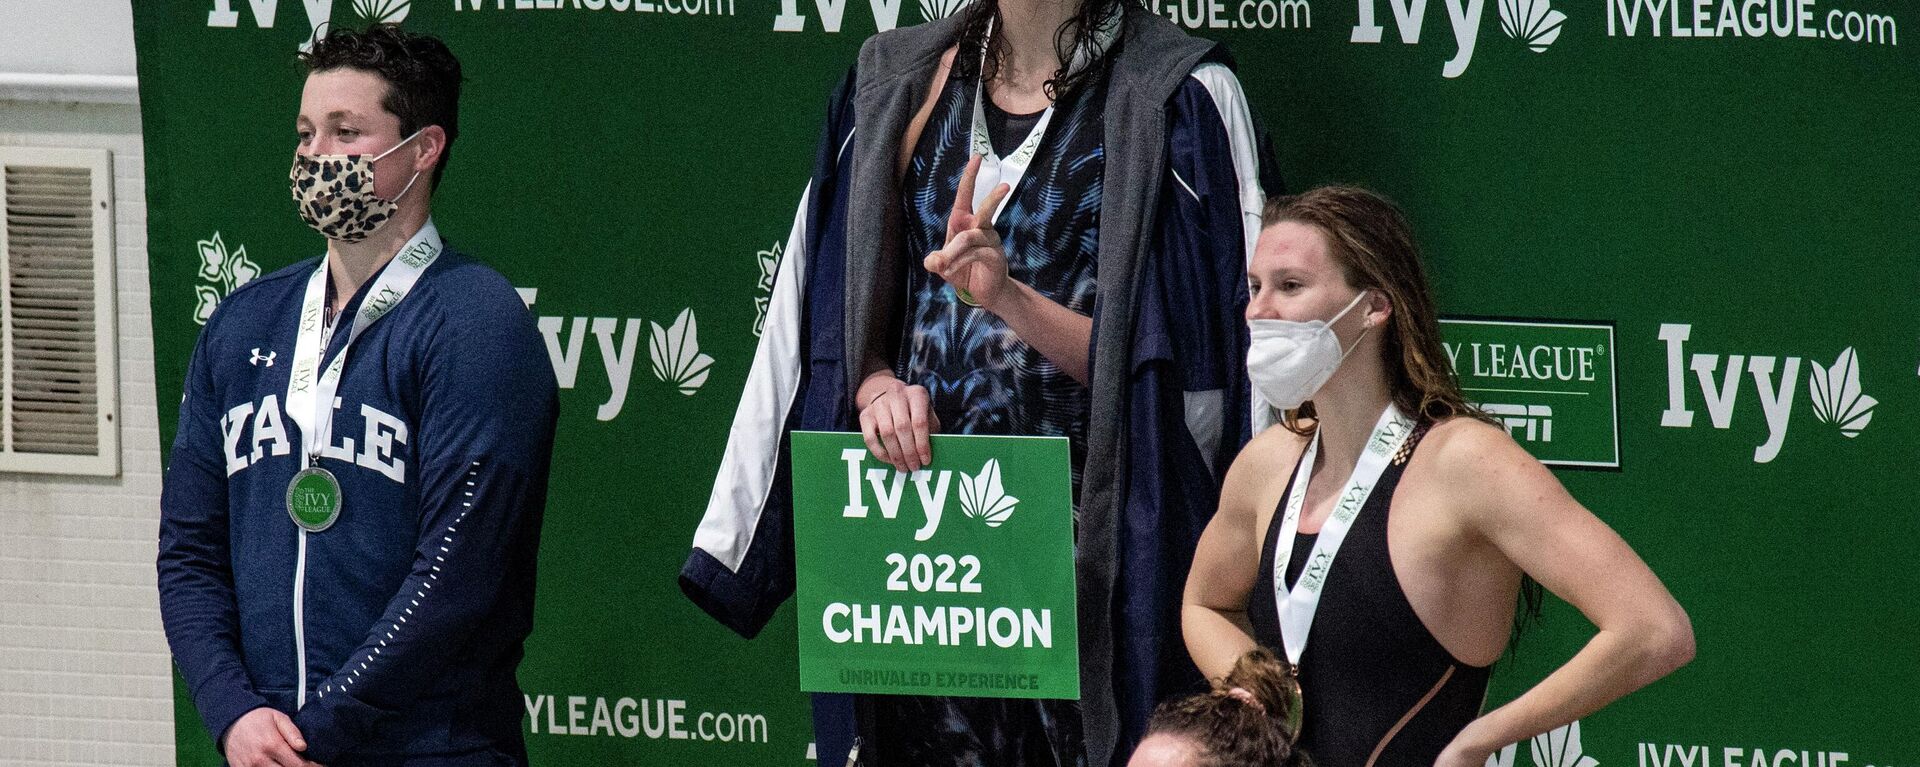 In this file photo taken on February 19, 2022 transgender swimmer Lia Thomas (2nd L) of Penn University and transgender swimmer Iszac Henig (L) of Yale pose with their medals after placing first and second in the 100-yard freestyle swimming race at the 2022 Ivy League Women's Swimming & Diving Championships at Harvard University in Cambridge, Massachusetts. - Sputnik International, 1920, 19.06.2022